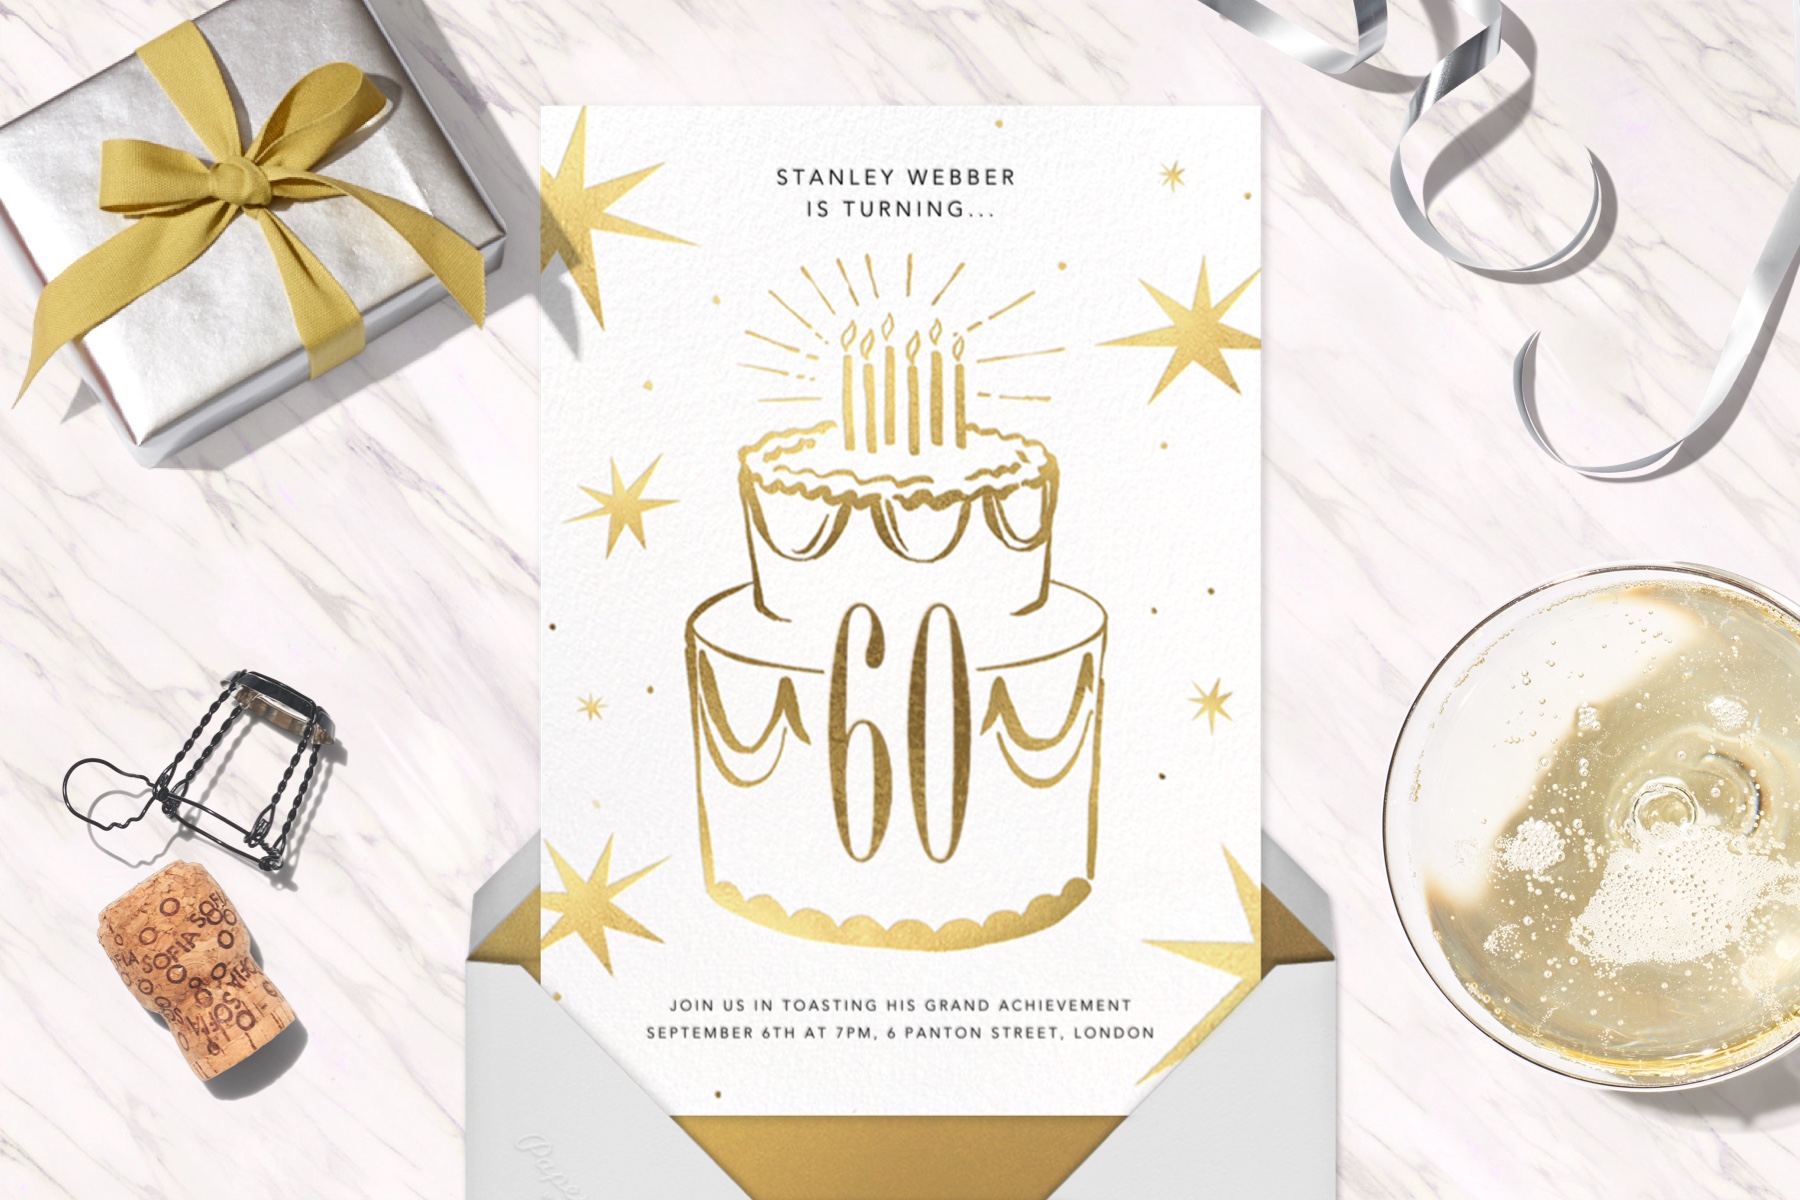 “Big Year” invitation by Paperless Post, featuring an illustration of a big cake with the number “60” on it. The card is surrounded by party goods like a present, cork, and champagne.